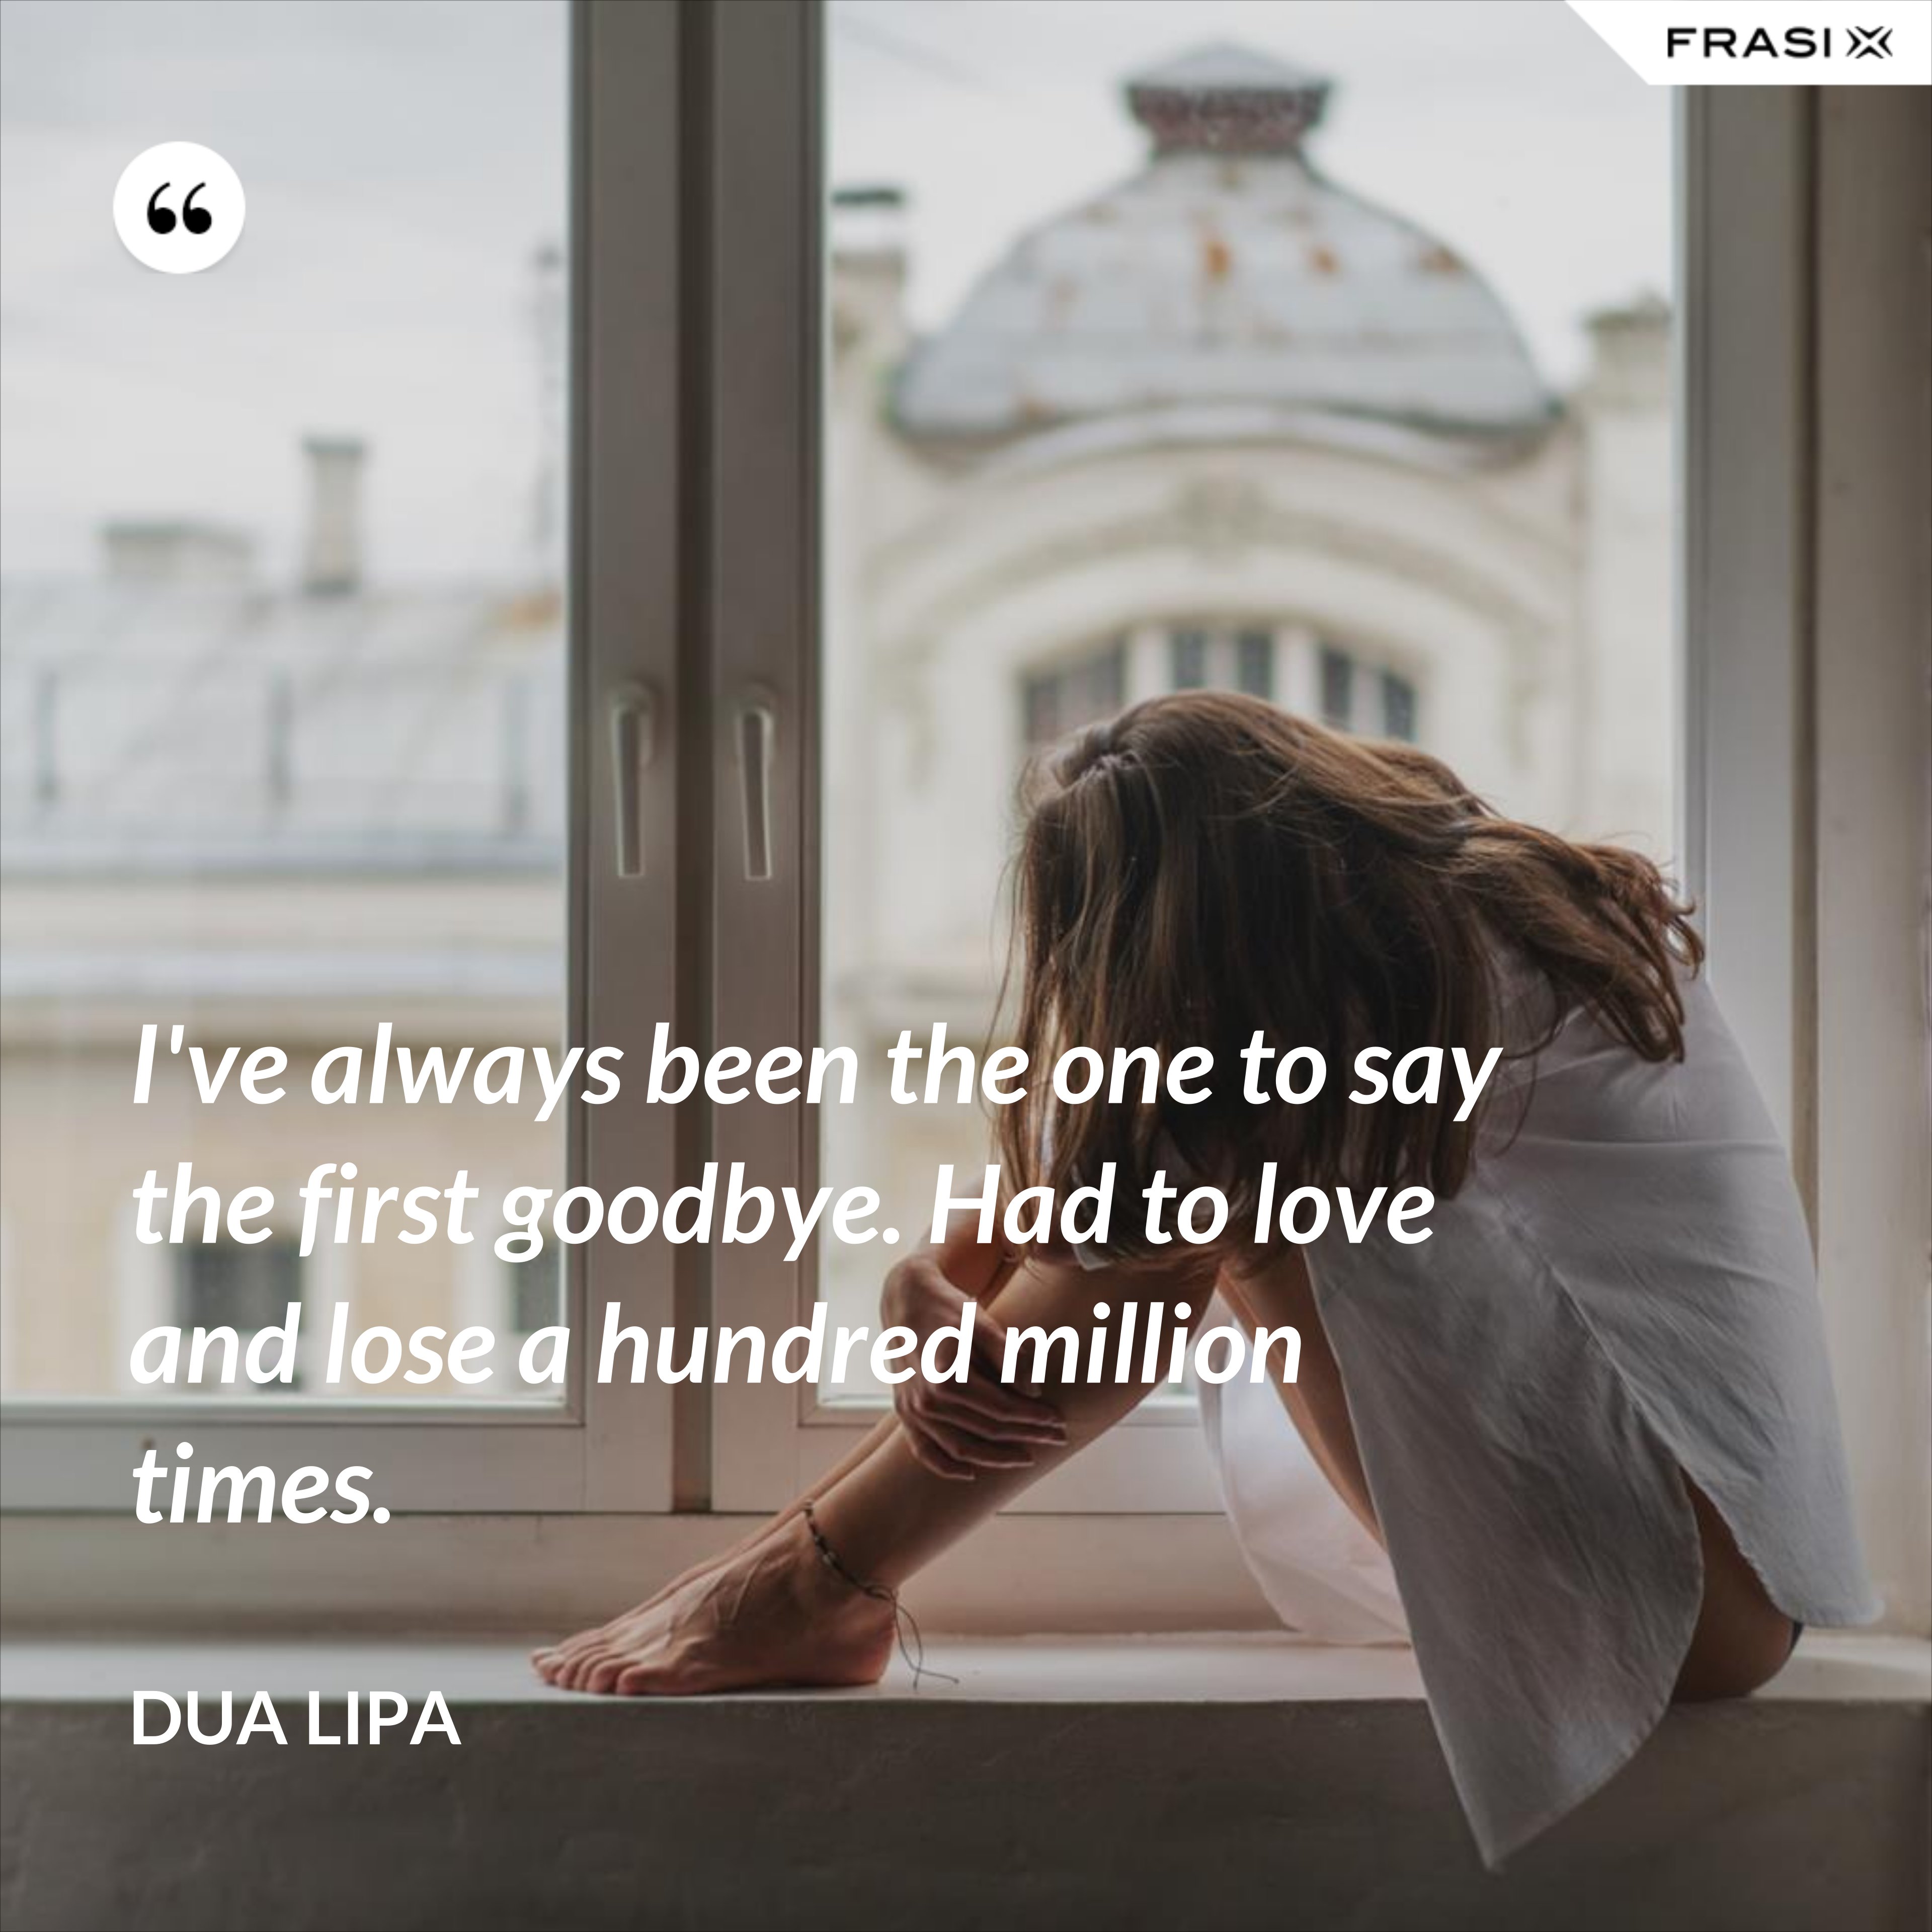 I've always been the one to say the first goodbye. Had to love and lose a hundred million times. - Dua Lipa